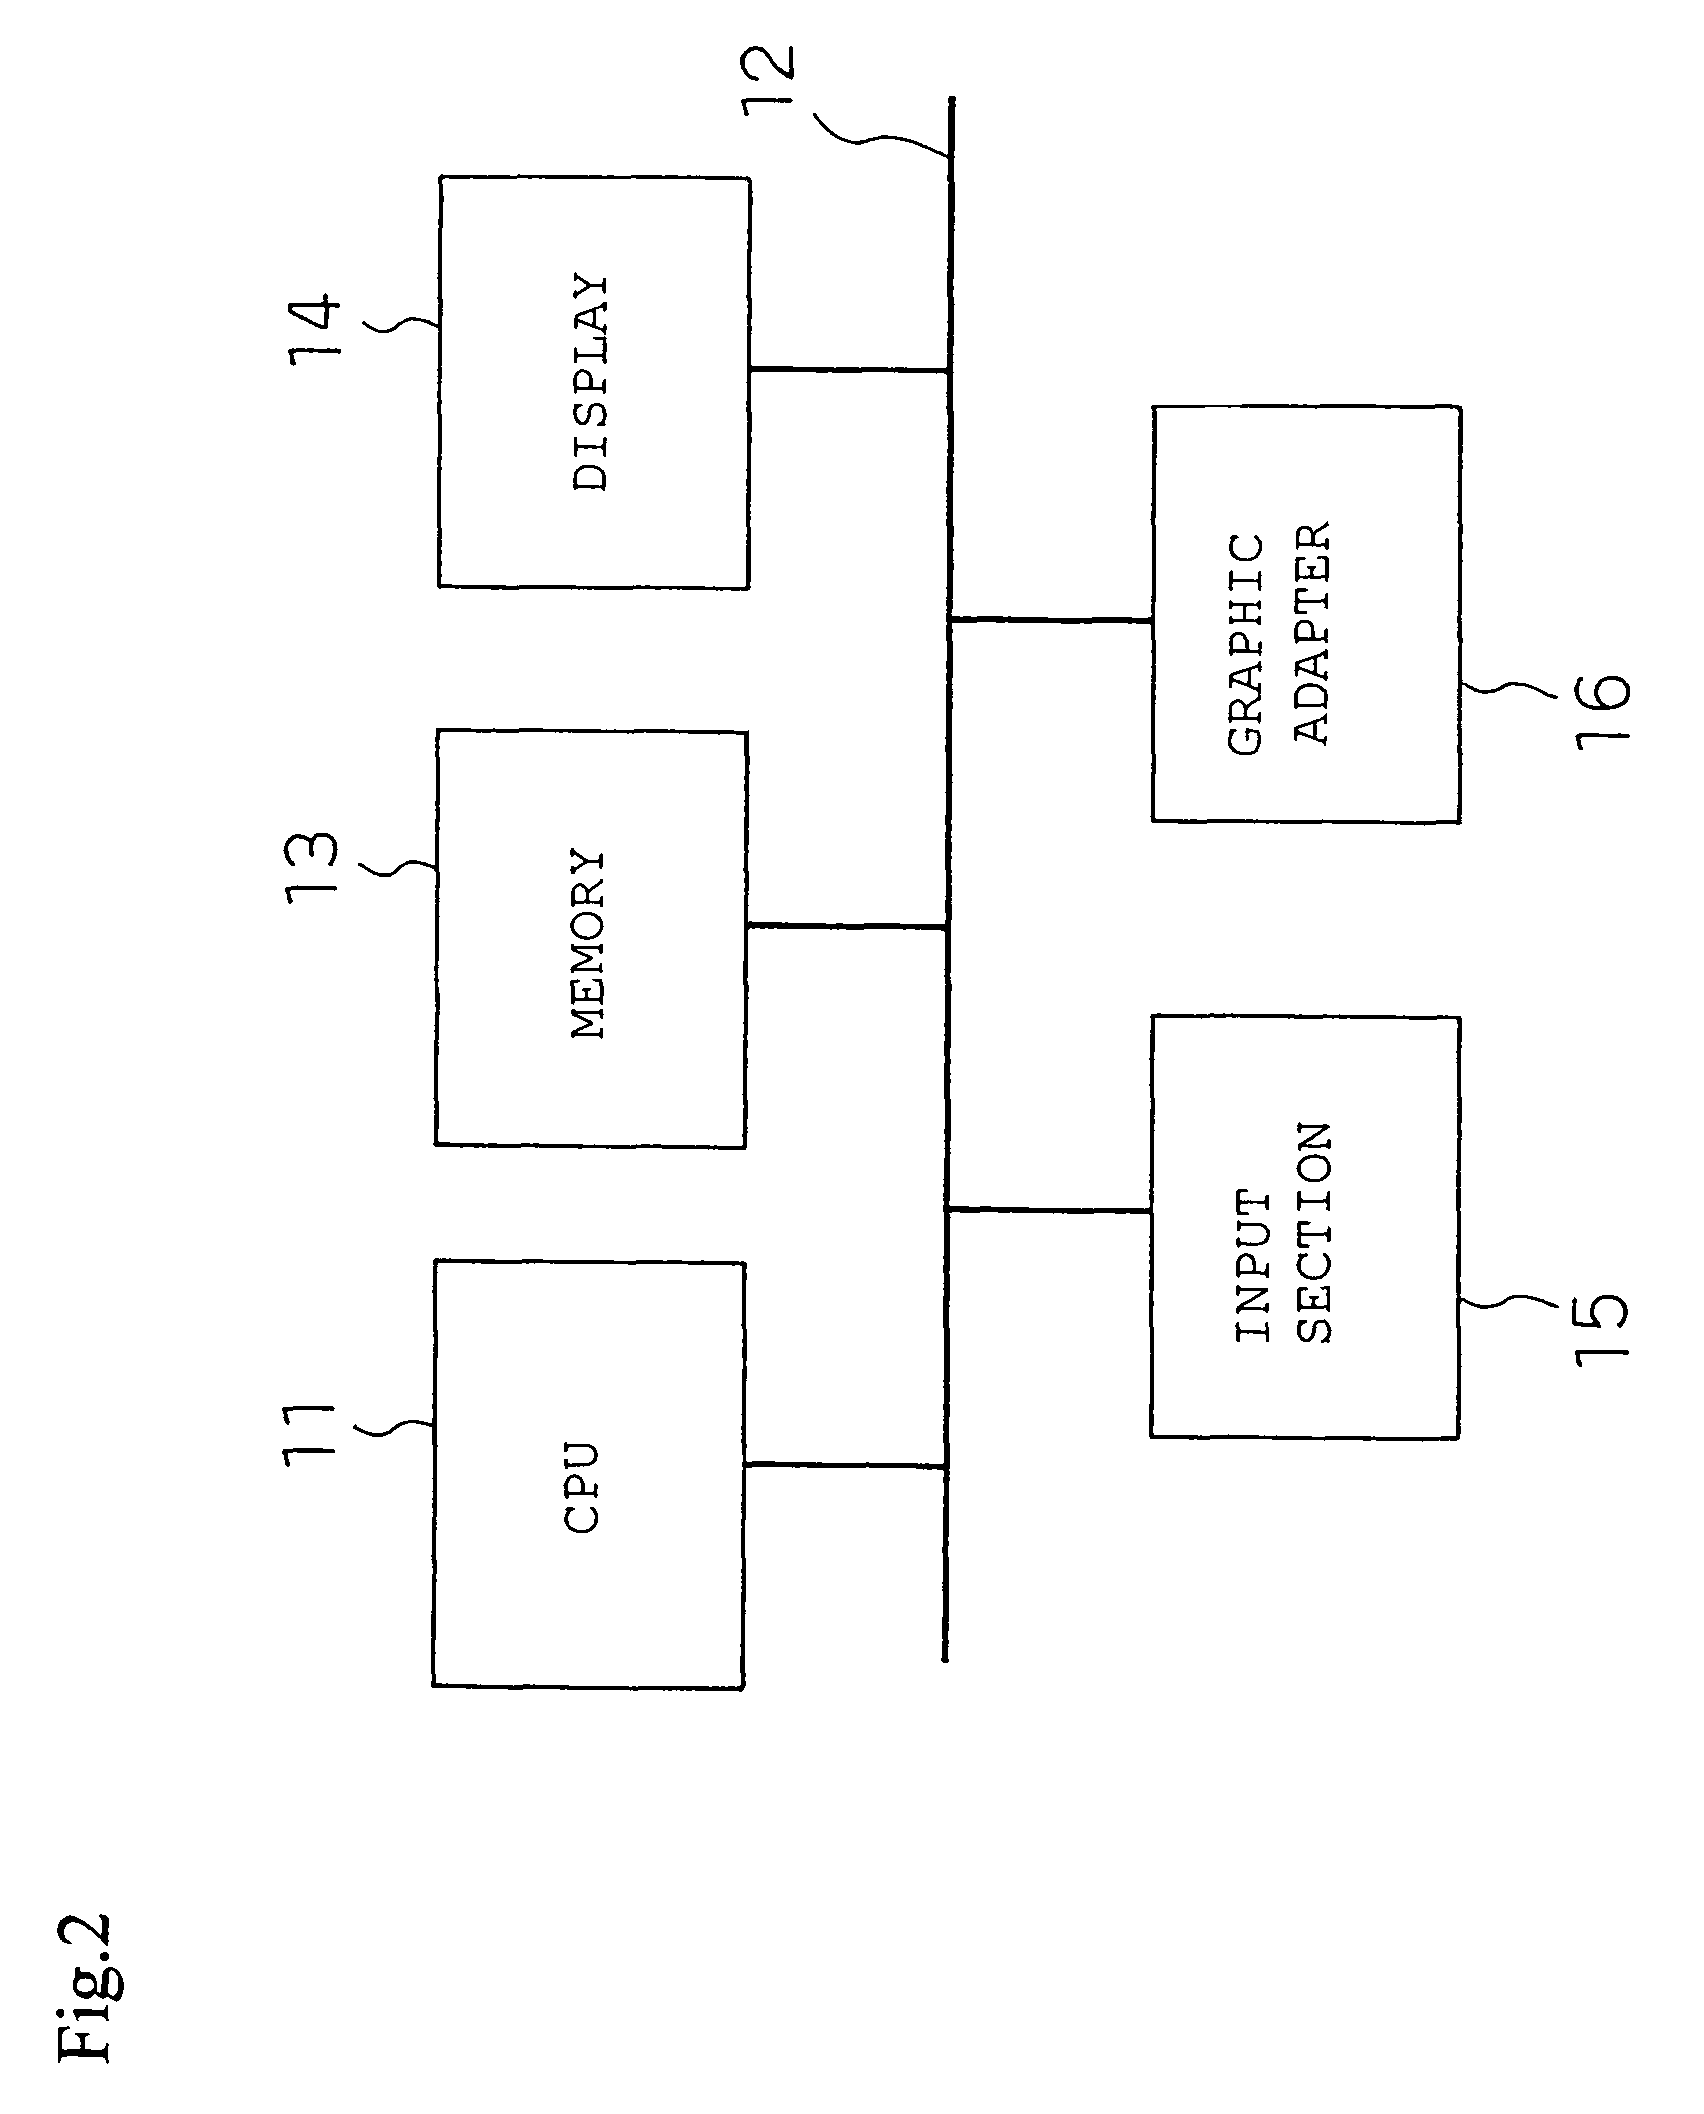 Image processing and transmission using high and low compression ratios depending on image change conditions